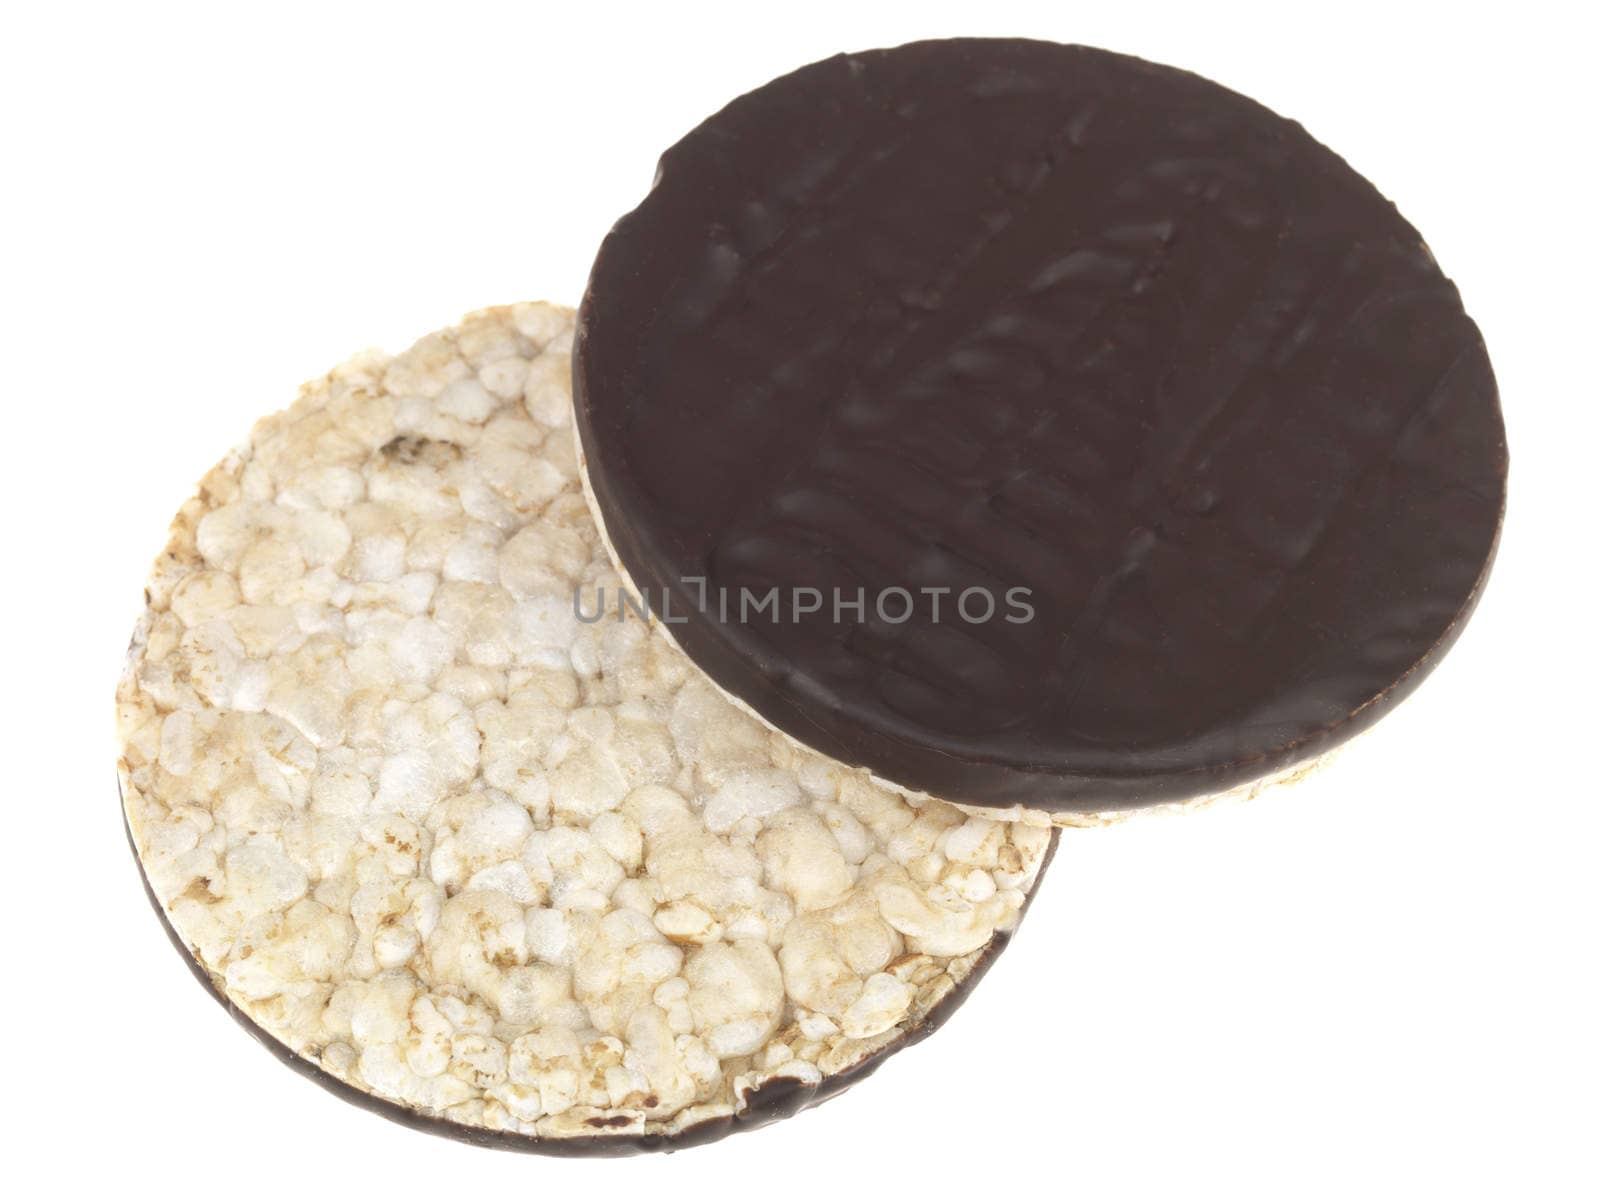 Chocolate Covered Rice Cake by Whiteboxmedia